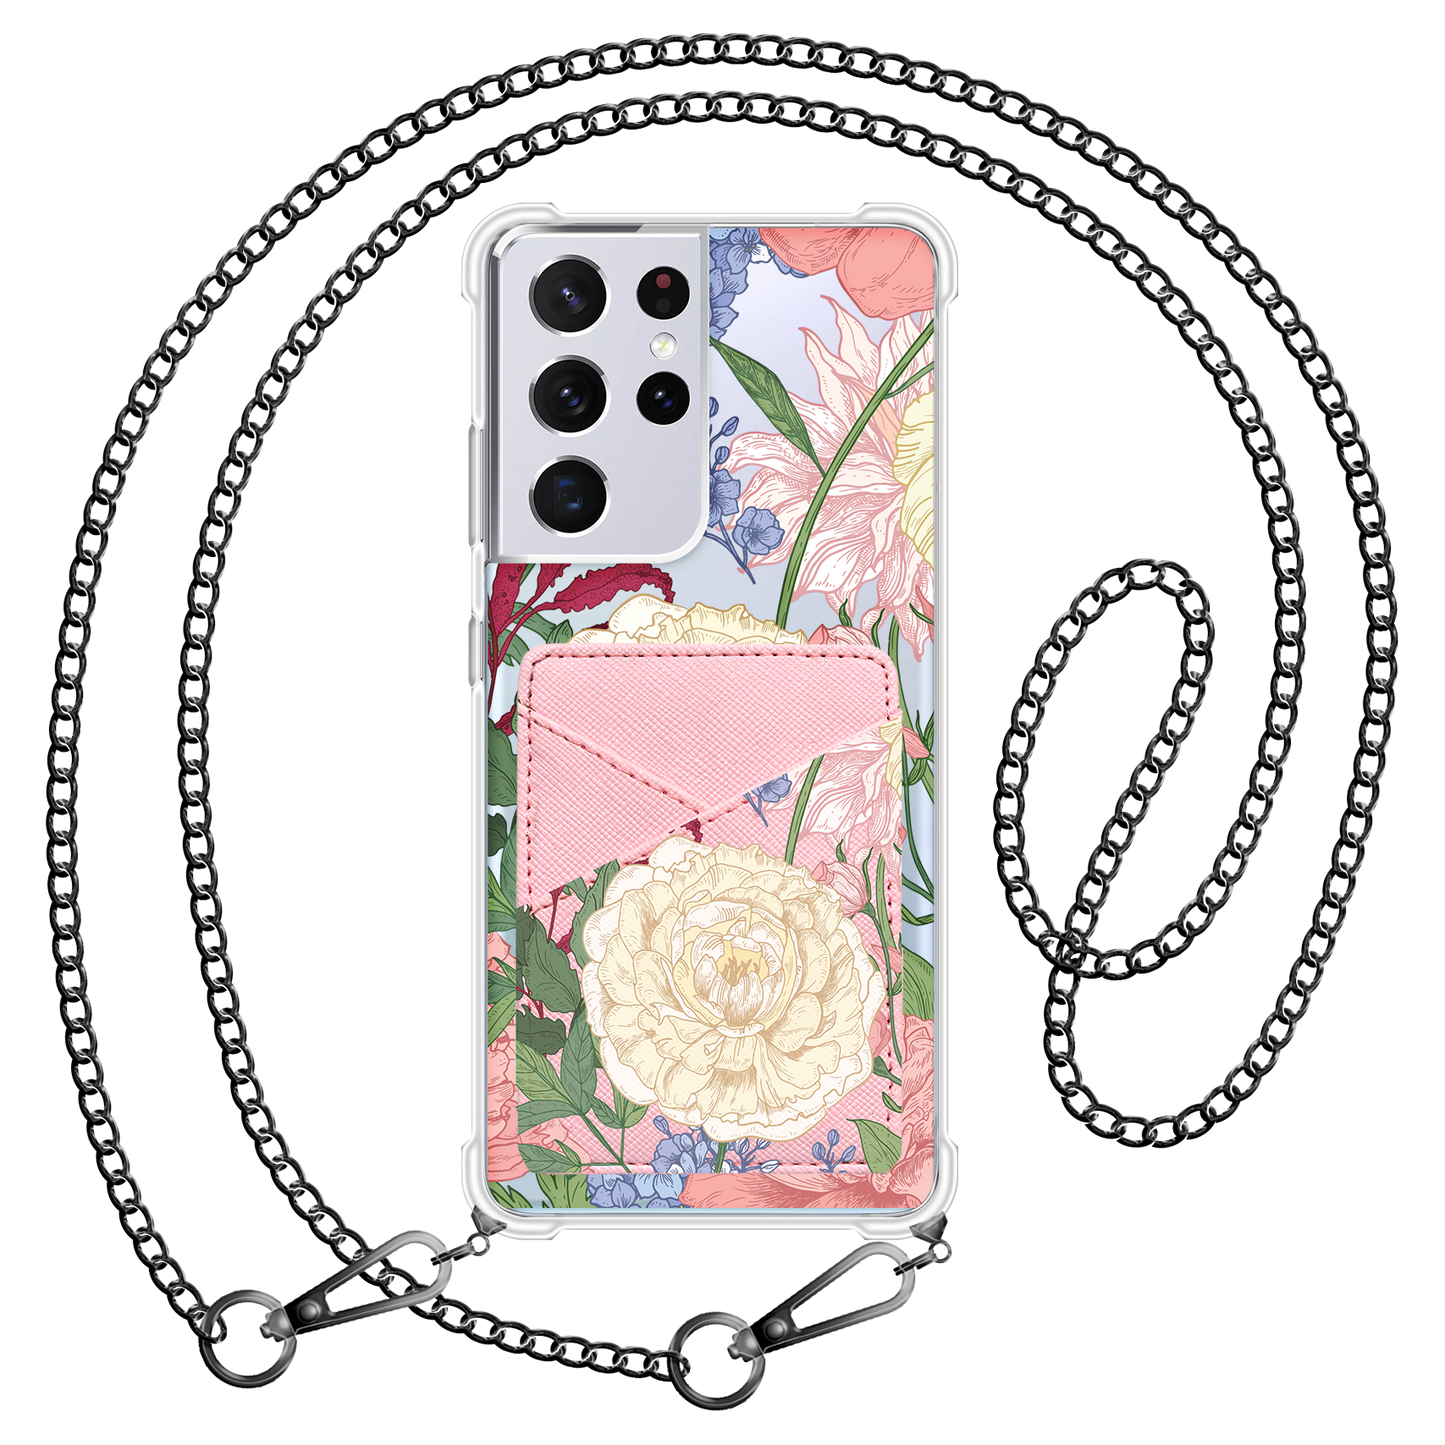 Android Phone Wallet Case - July Delphinium 2.0